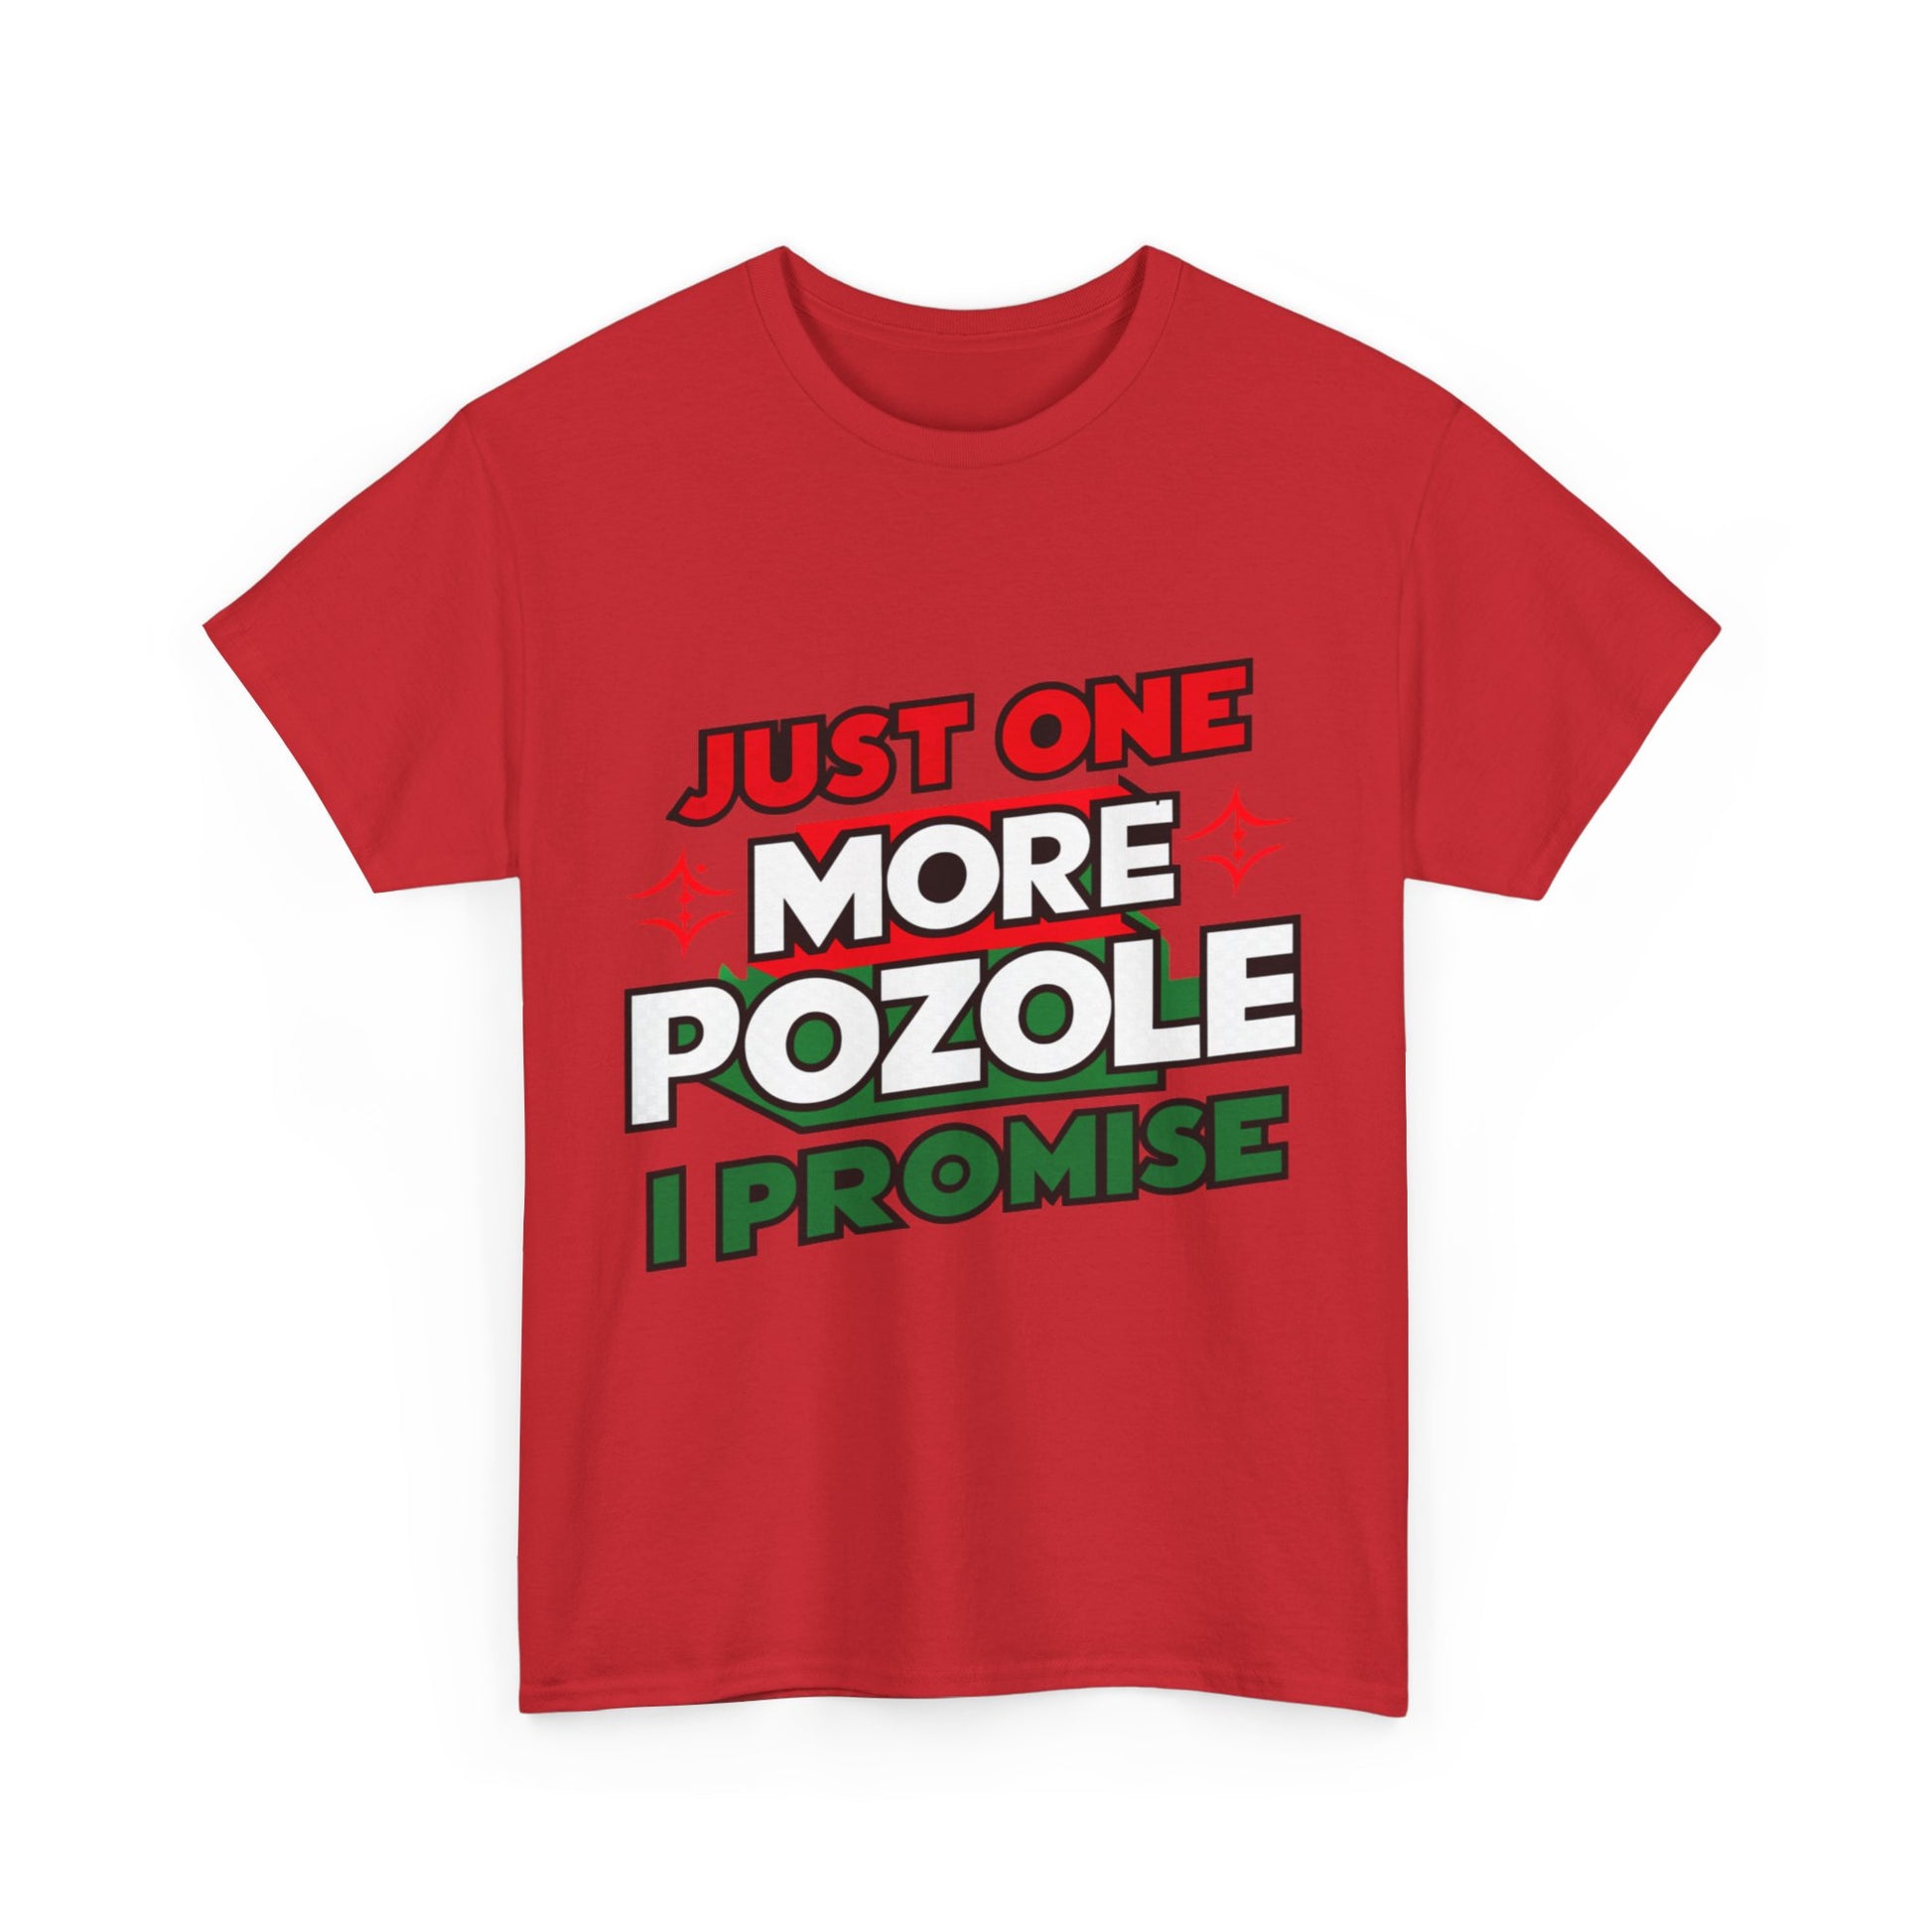 Just One More Pozole I Promise Mexican Food Graphic Unisex Heavy Cotton Tee Cotton Funny Humorous Graphic Soft Premium Unisex Men Women Red T-shirt Birthday Gift-33